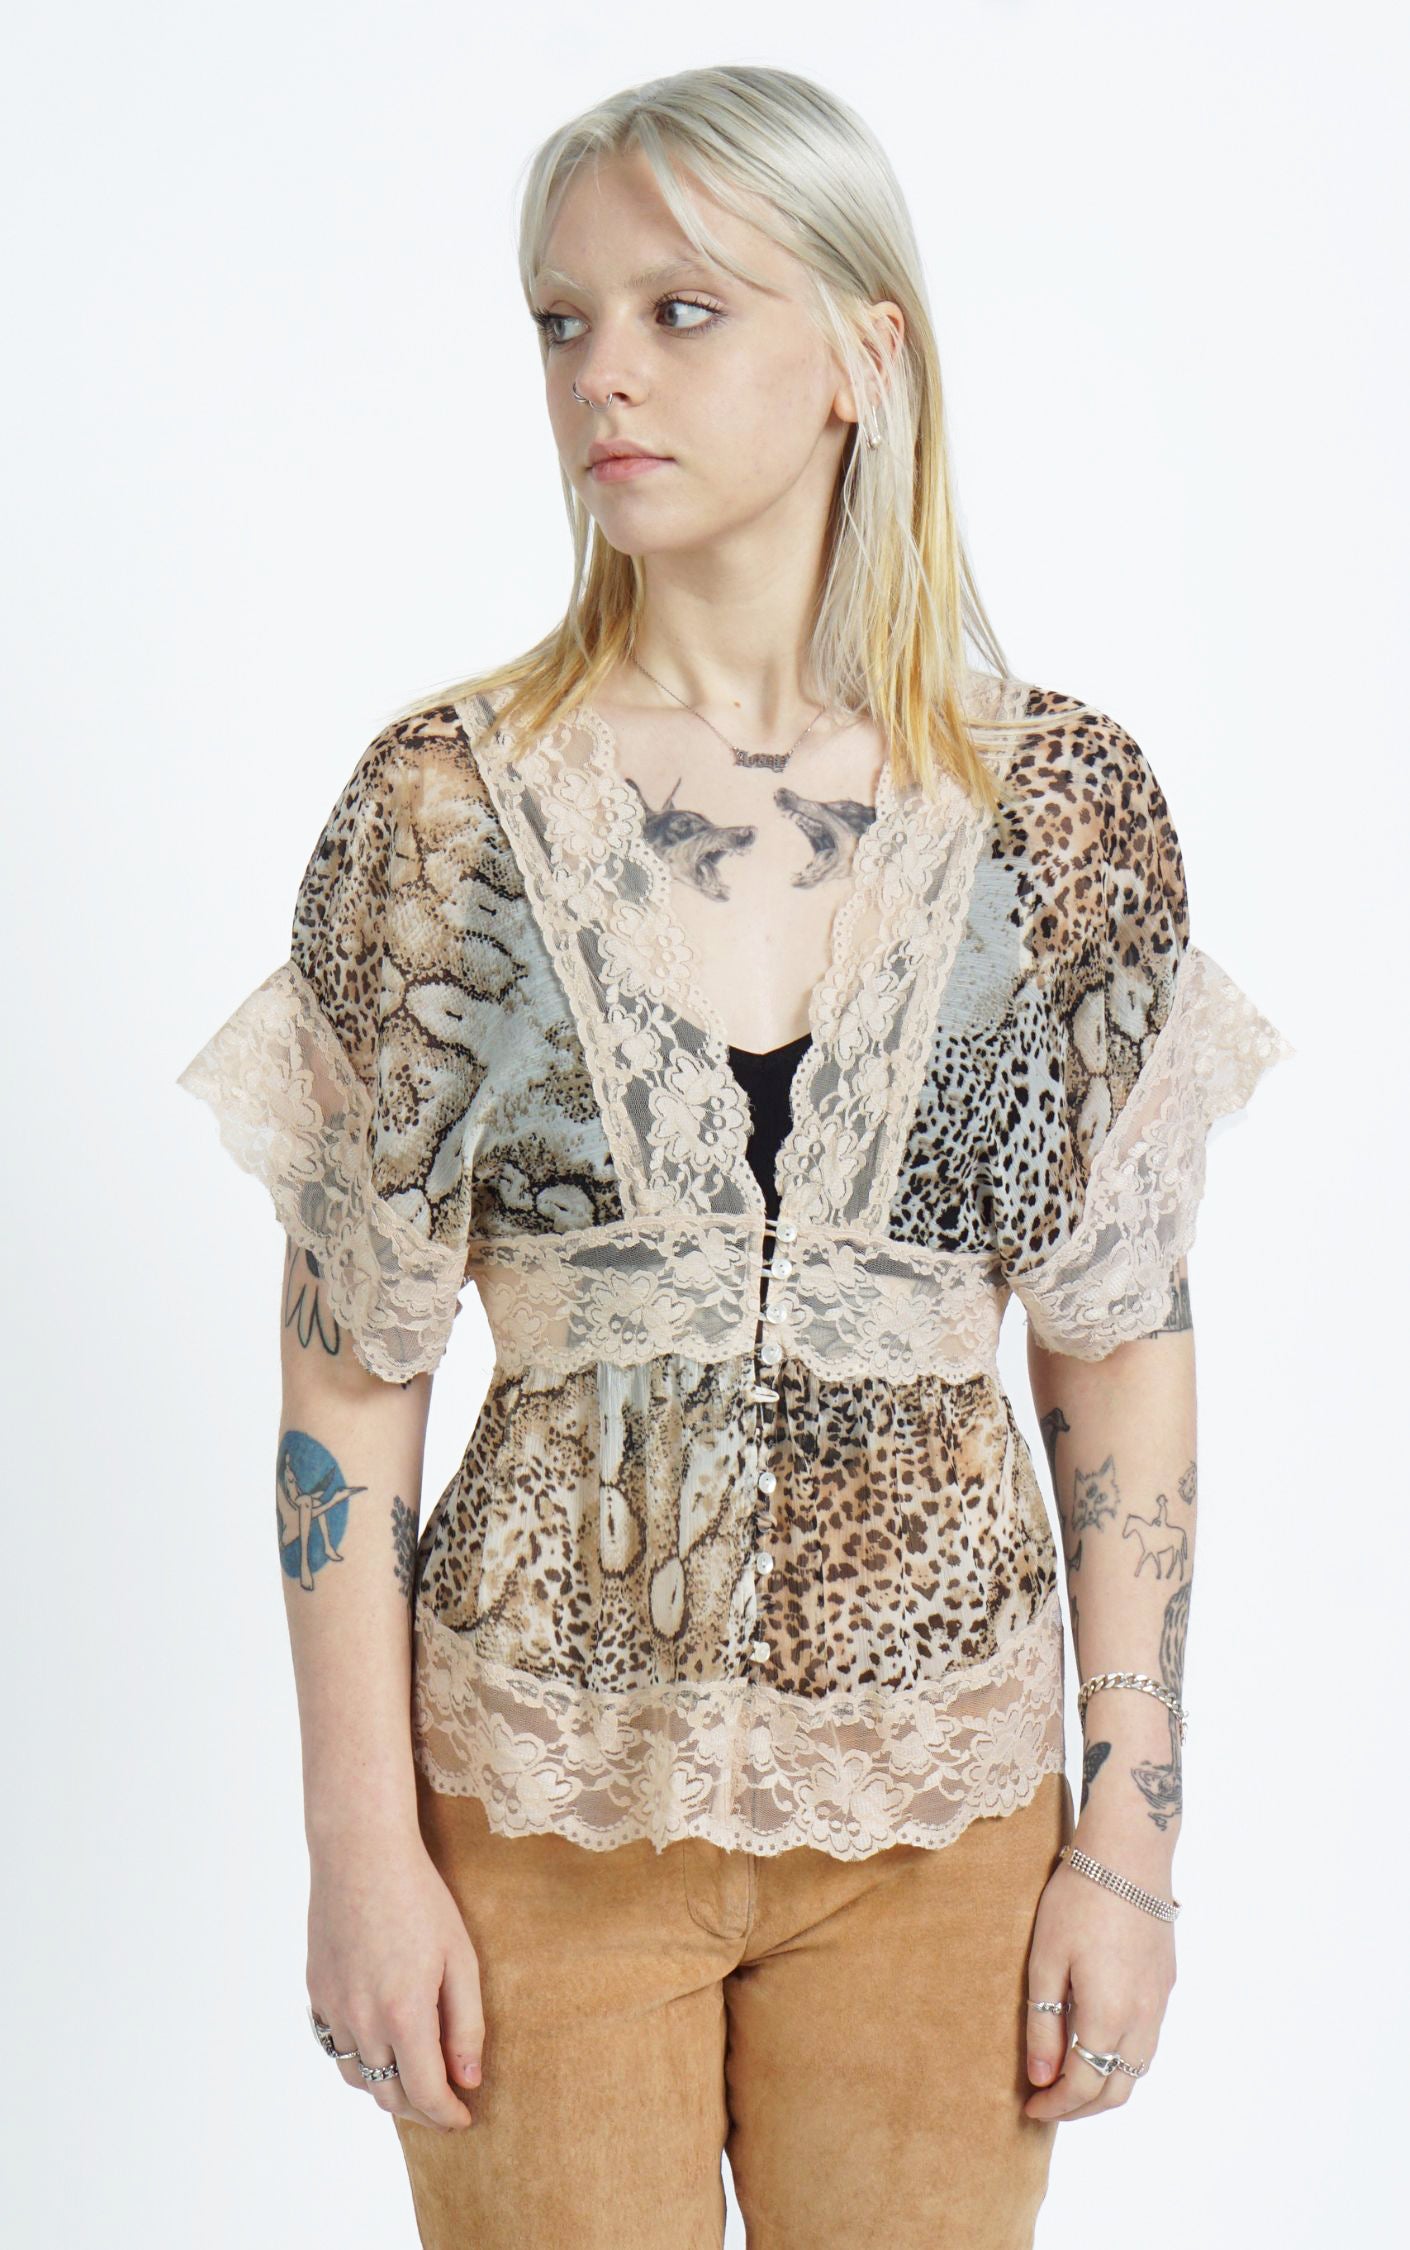 Y2K Leopard Cheetah Lace Sheer Mesh Button Down Top resellum